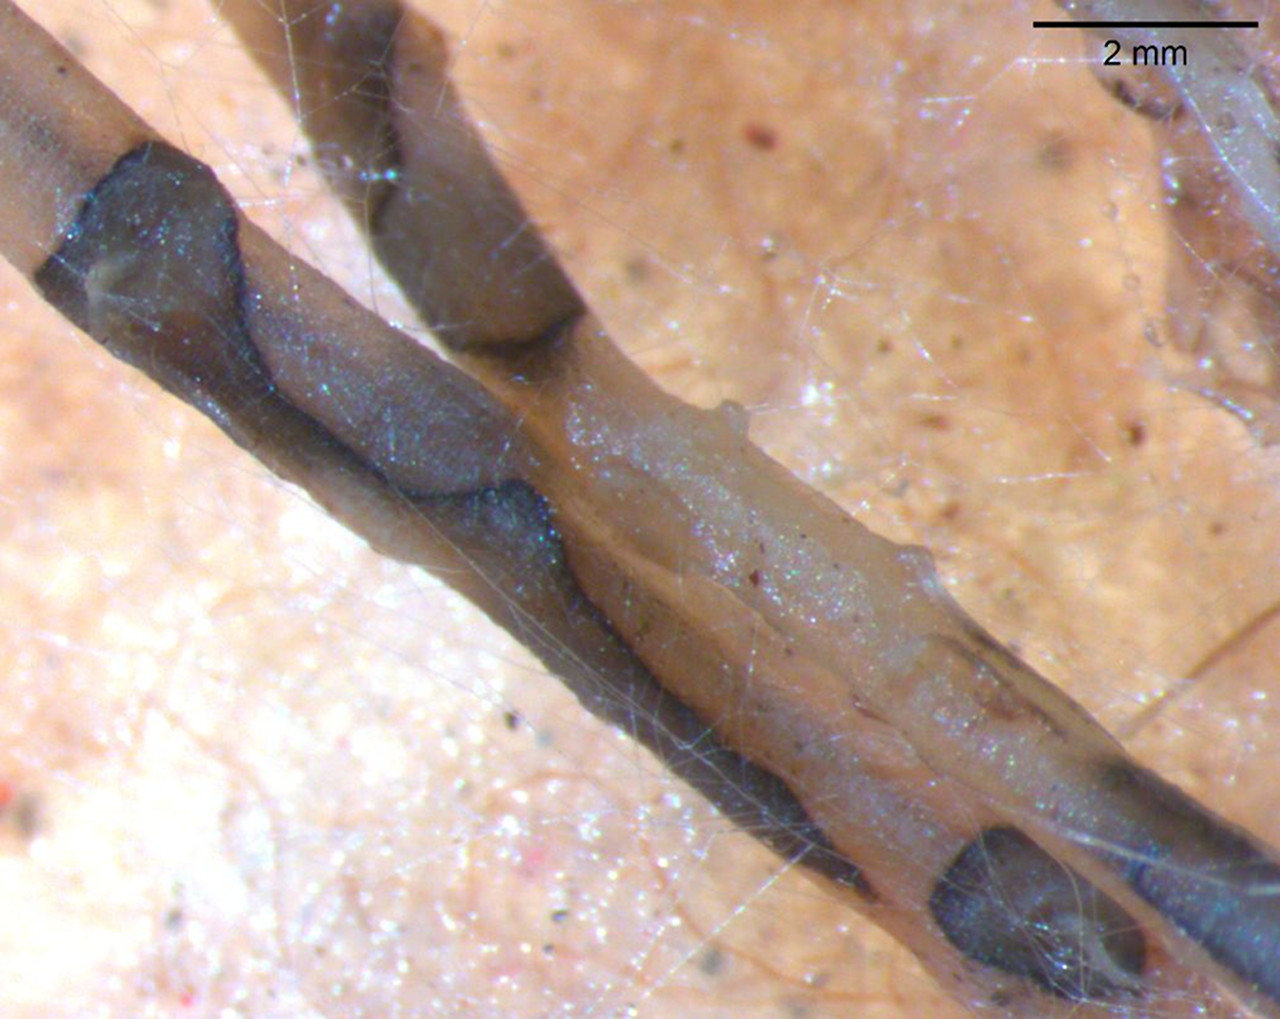 Distinct black lines (pseudo-stromata) formed by the black root rot pathogen, <em>Diaporthe sclerotioides</em>, in the roots of an infected cucumber plant.